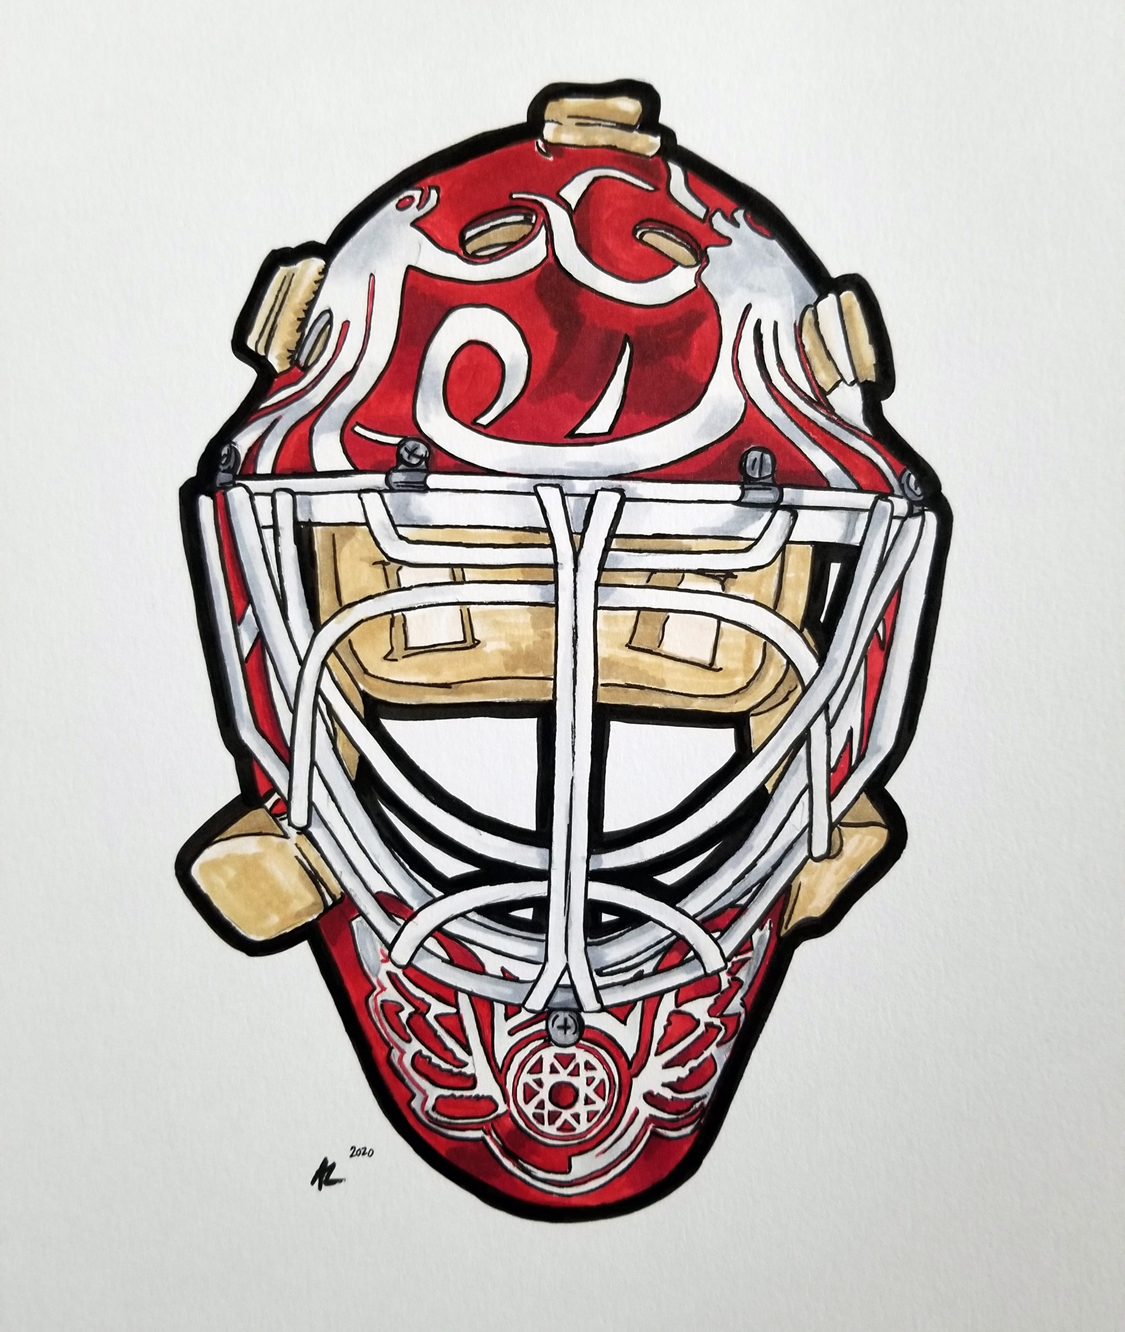 Pen and ink drawing of a goalie mask with cage and red and white octopus design.